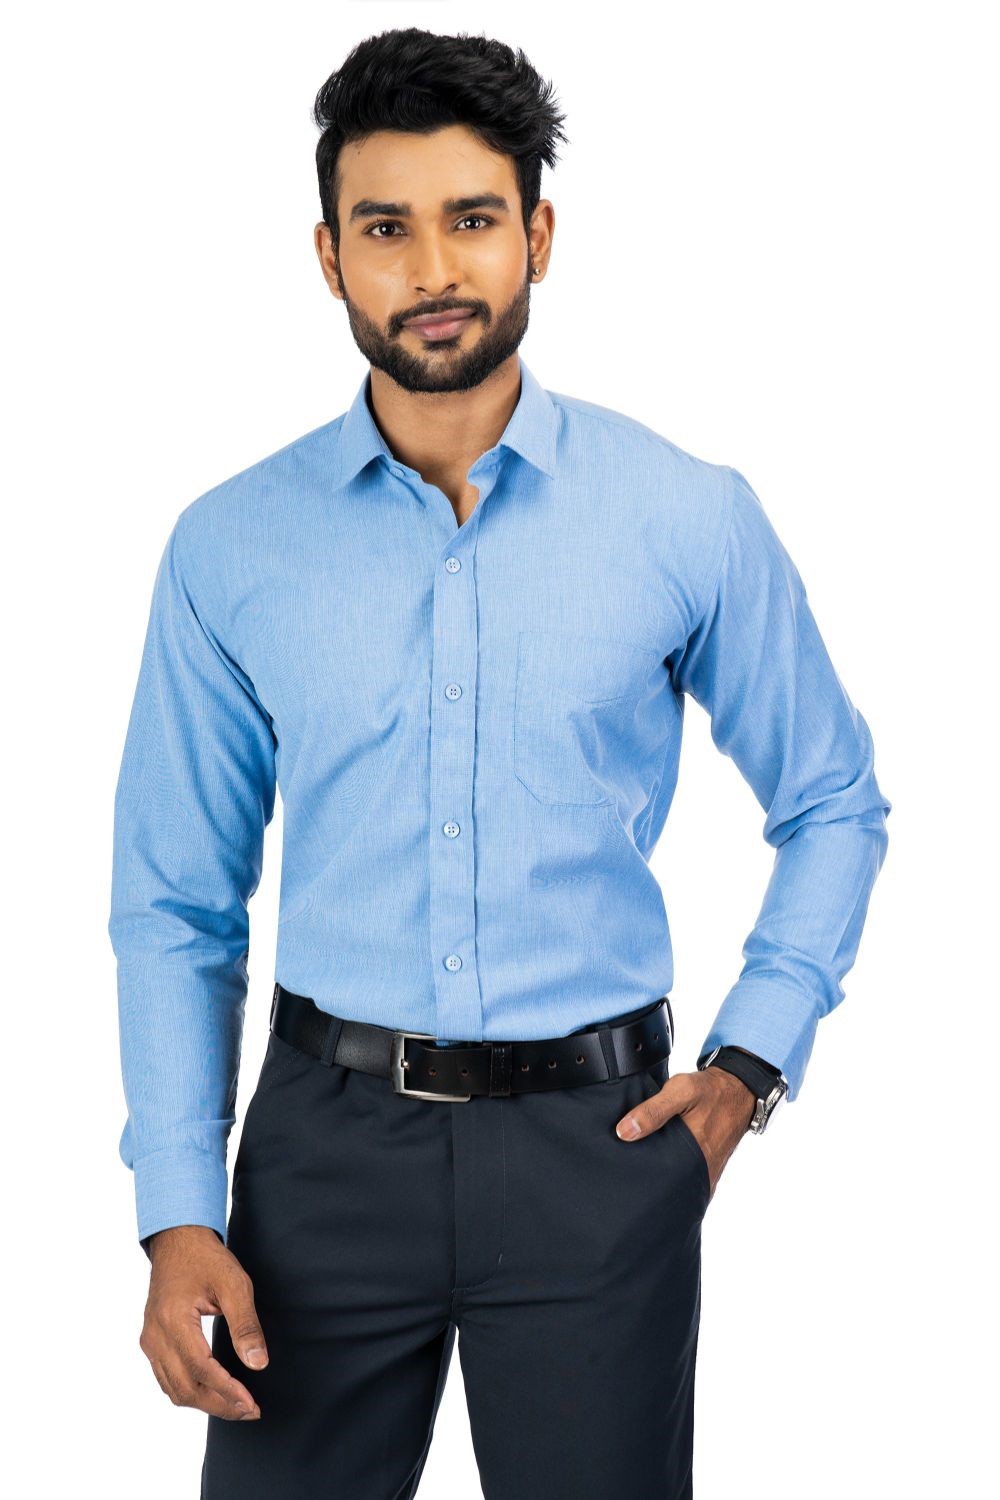 Classic textured Stone Blue Full Sleeve Cotton Blend Shirt With A Regular fit and easy maintenance.